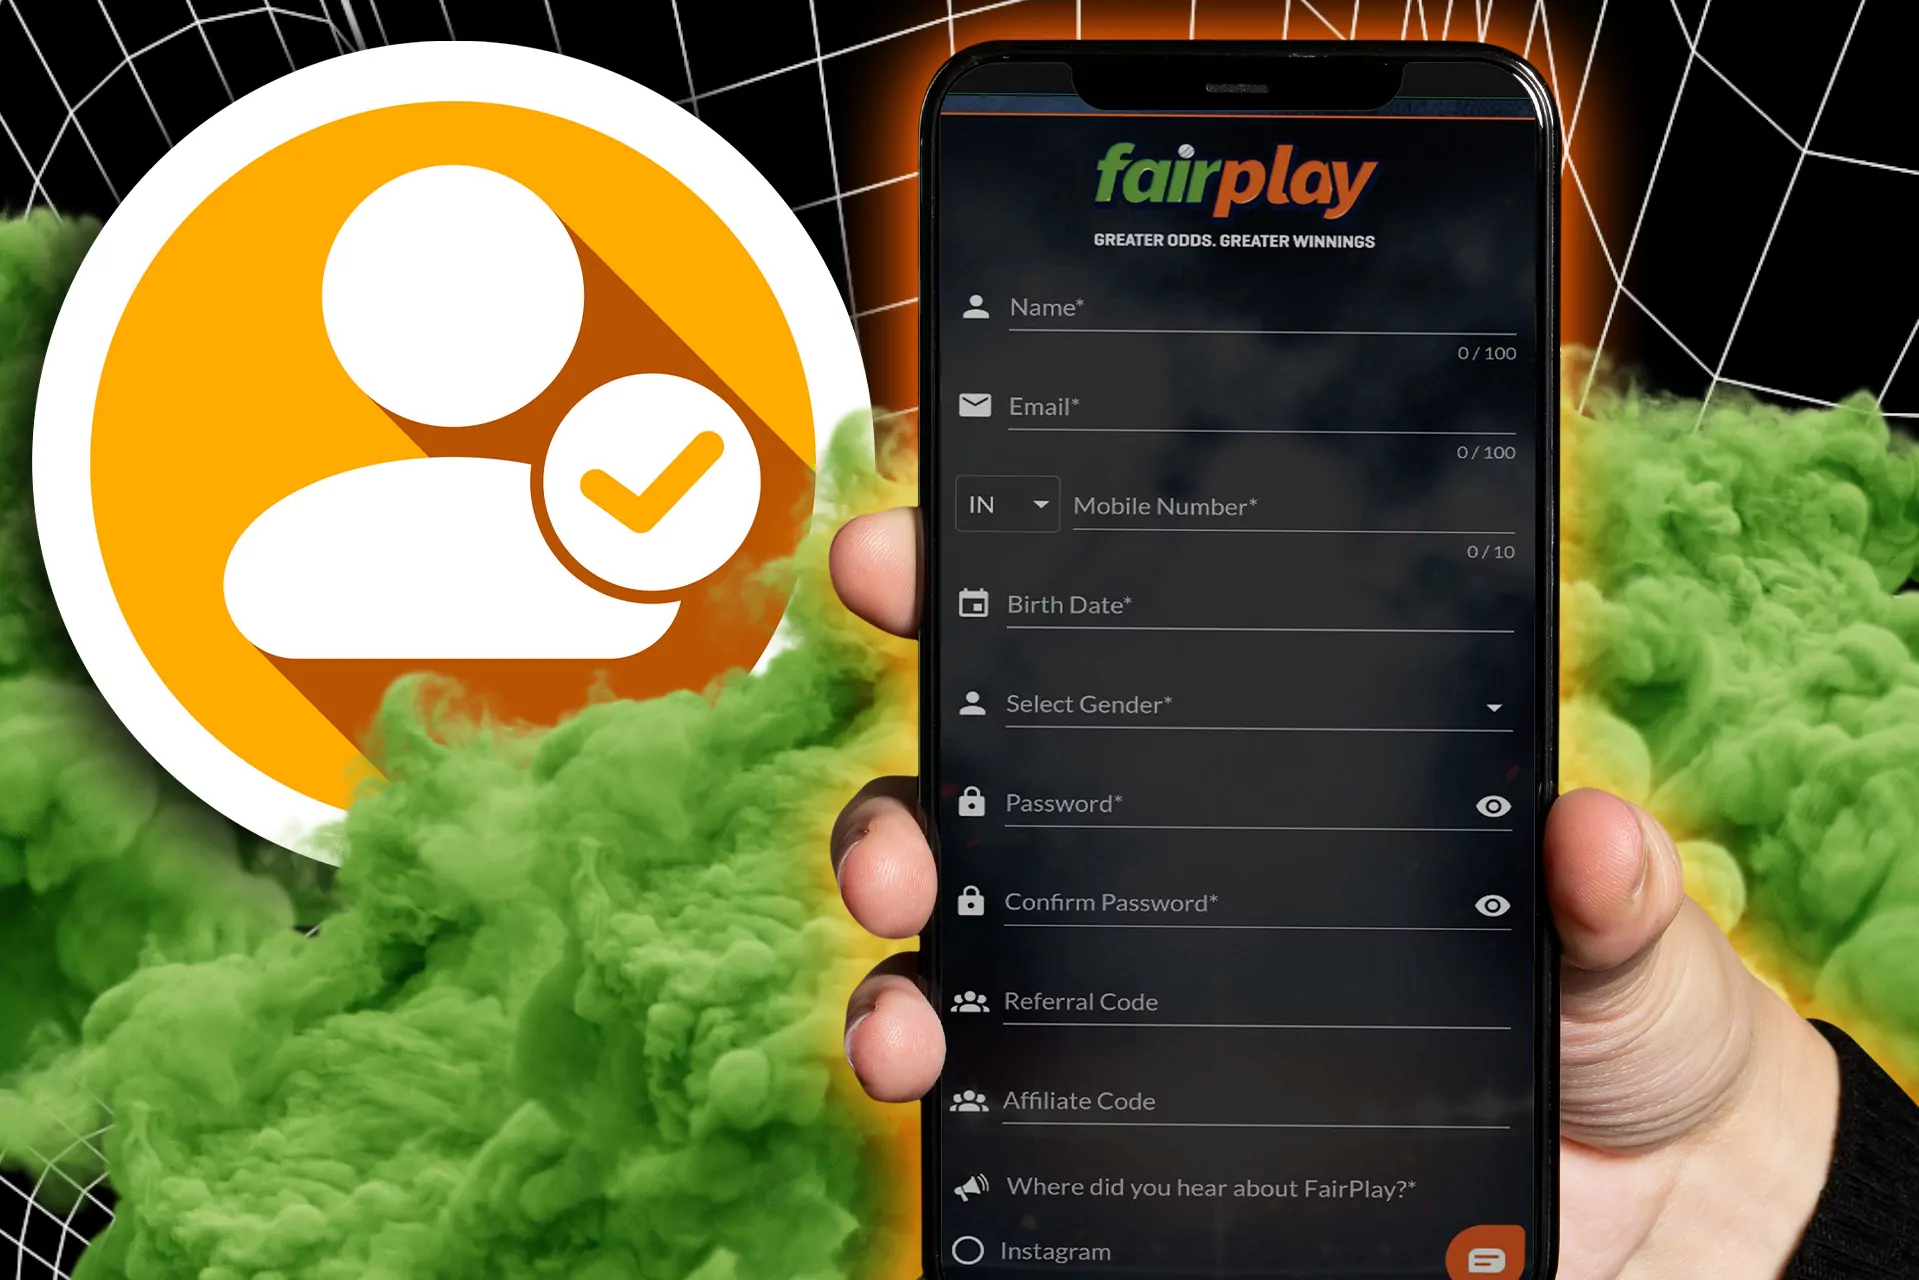 You can sign up for Fairplay via your mobile phone.